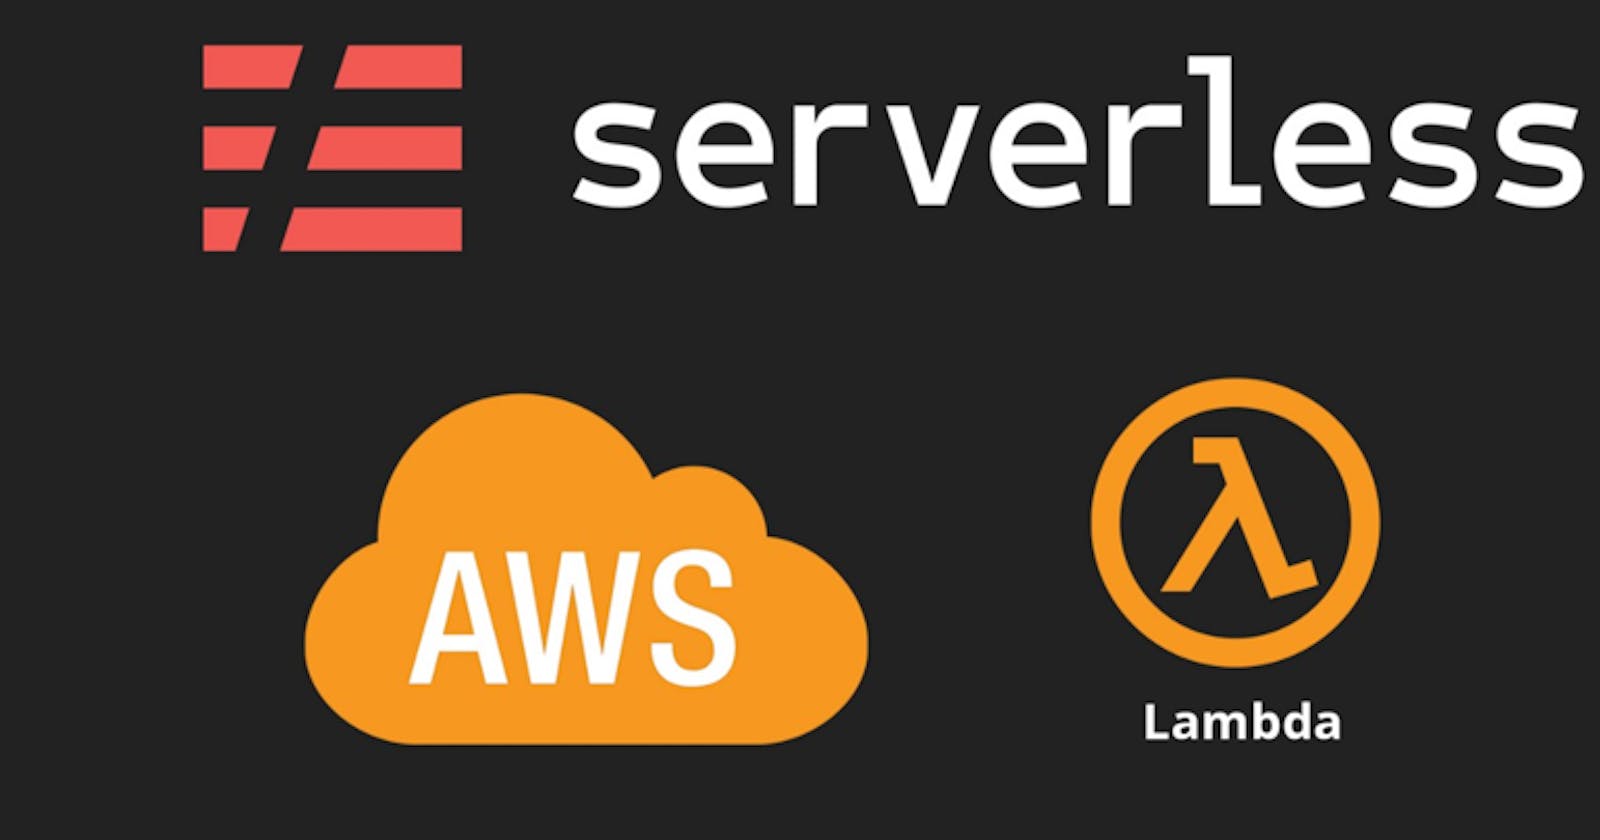 ServerlessArchitecture#04 AWS Lambda Cold Starts#PART-4 How long does AWS Lambda keep your idle functions around before a cold start?